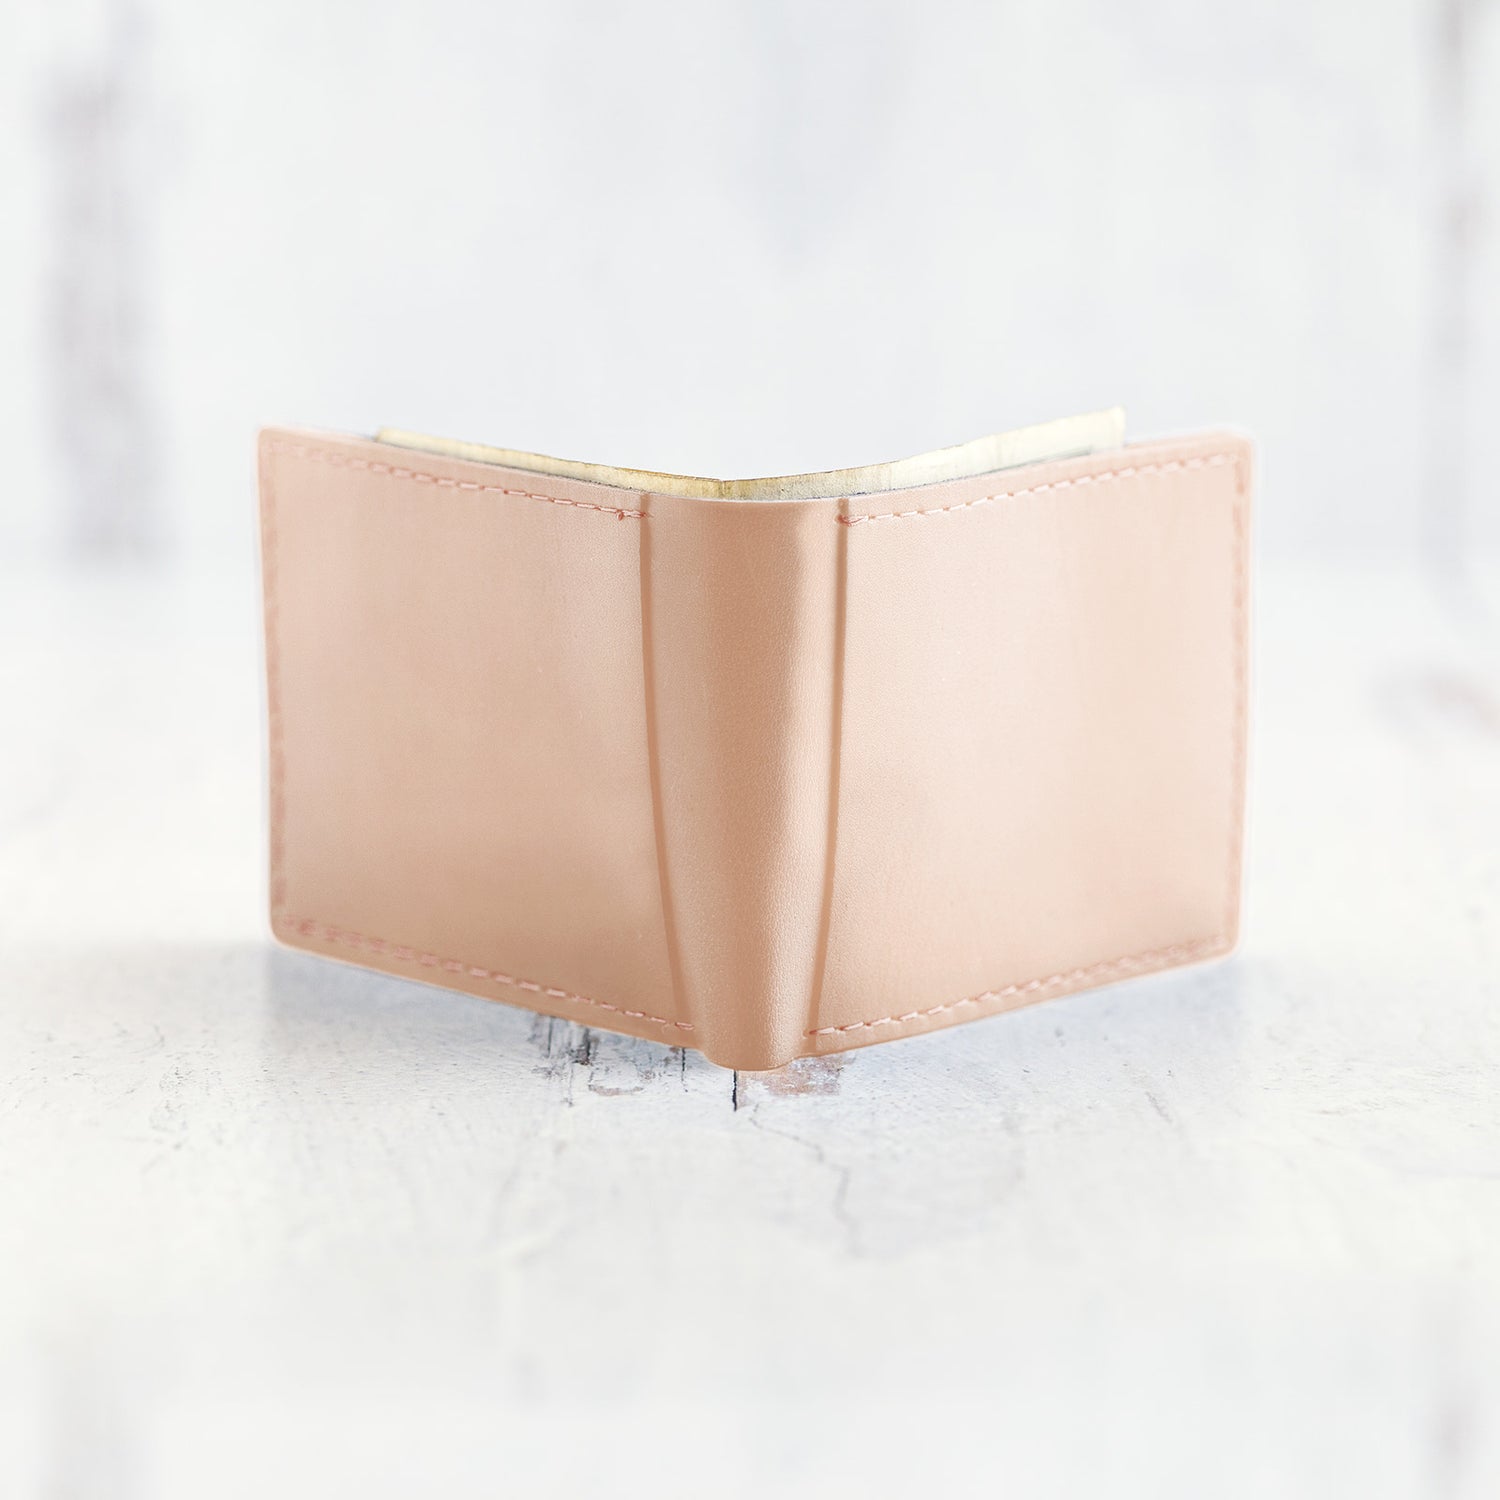 Bifold Leather Wallet